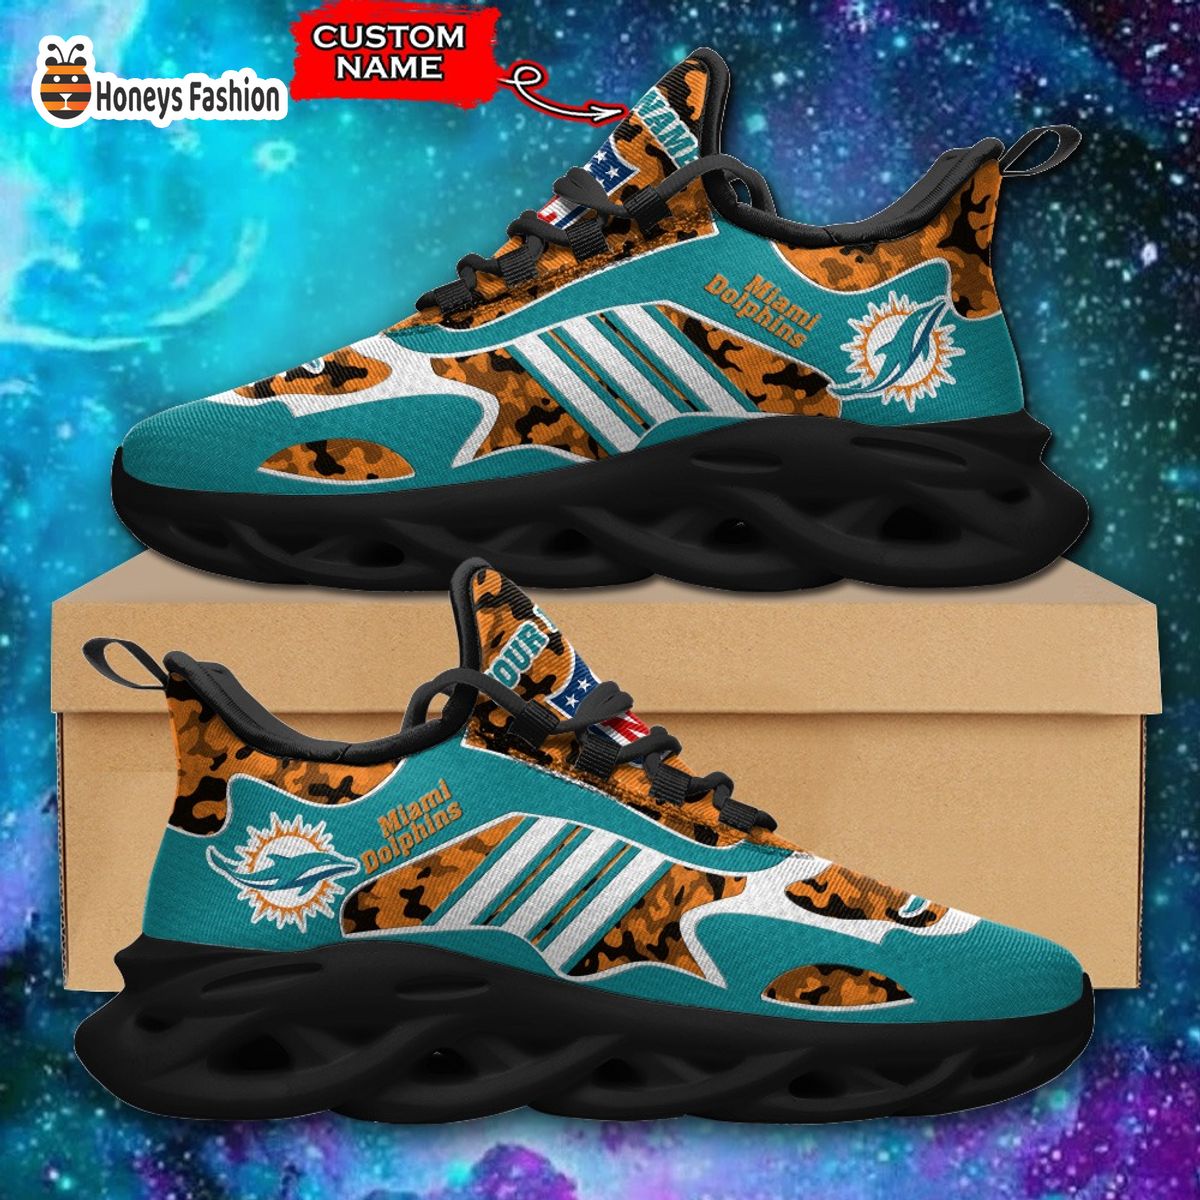 Miami Dolphins NFL Adidas Personalized Max Soul Shoes